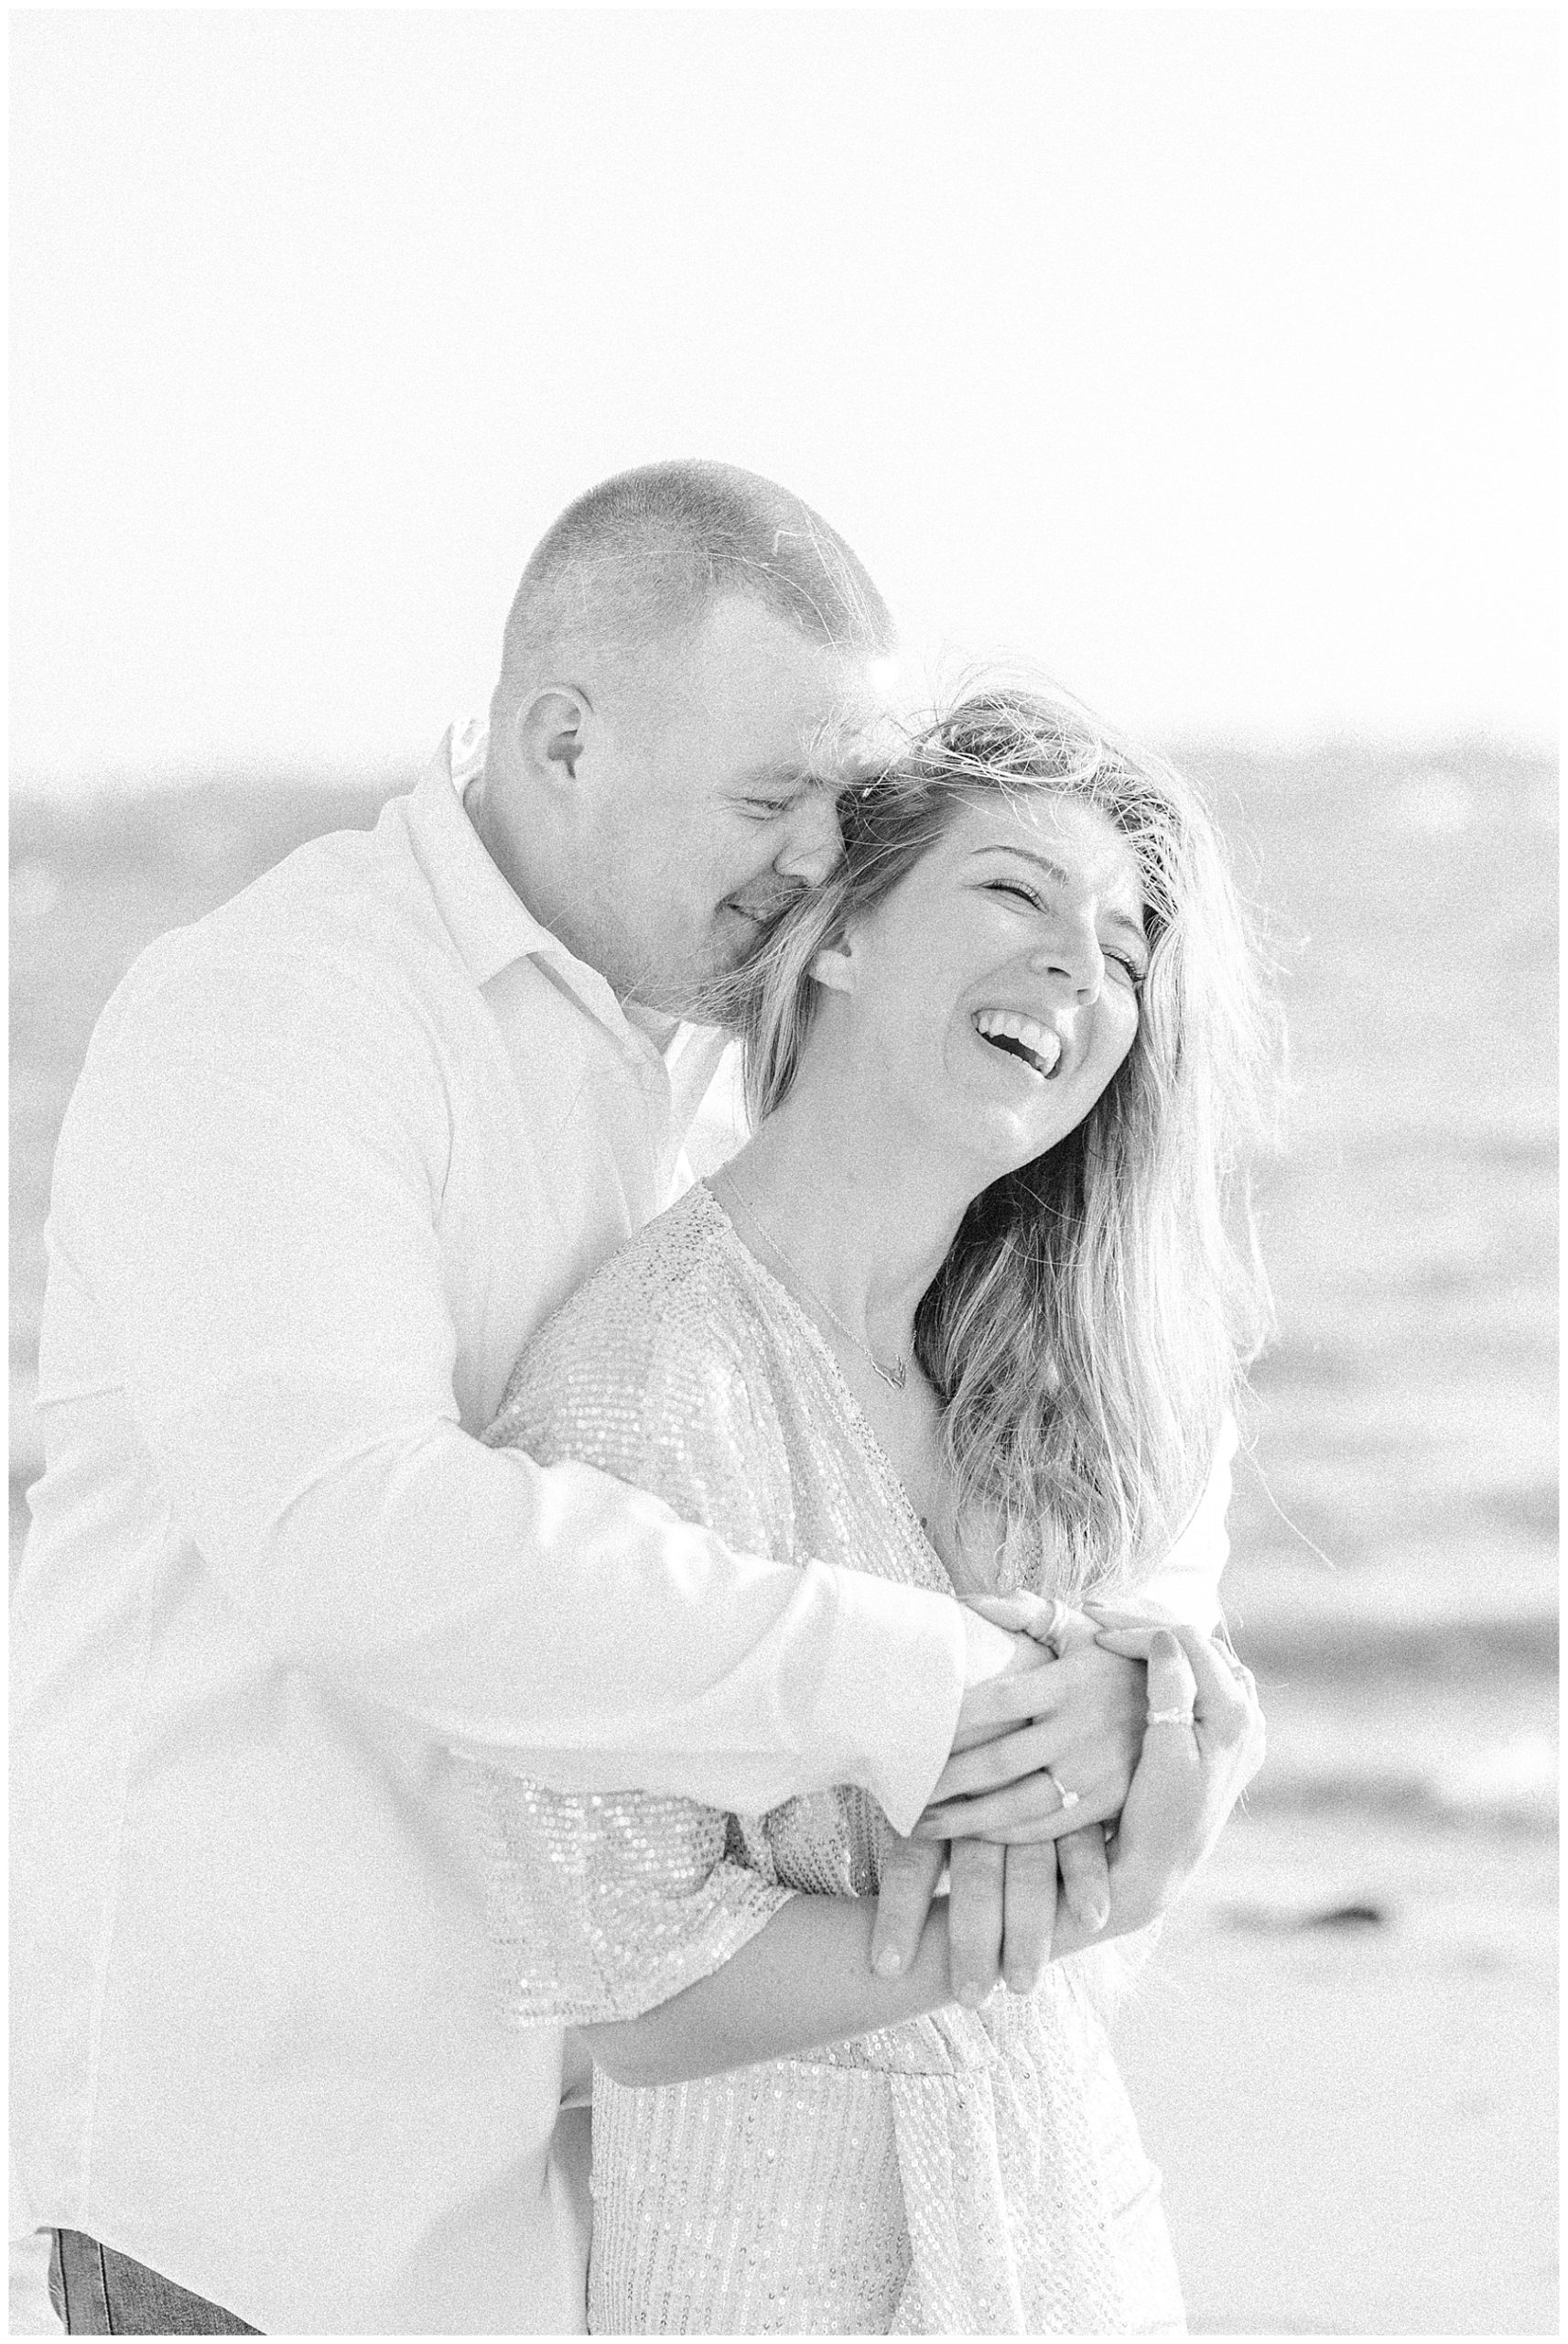 candid moment of couple during Cape Cod Beach Engagement Session